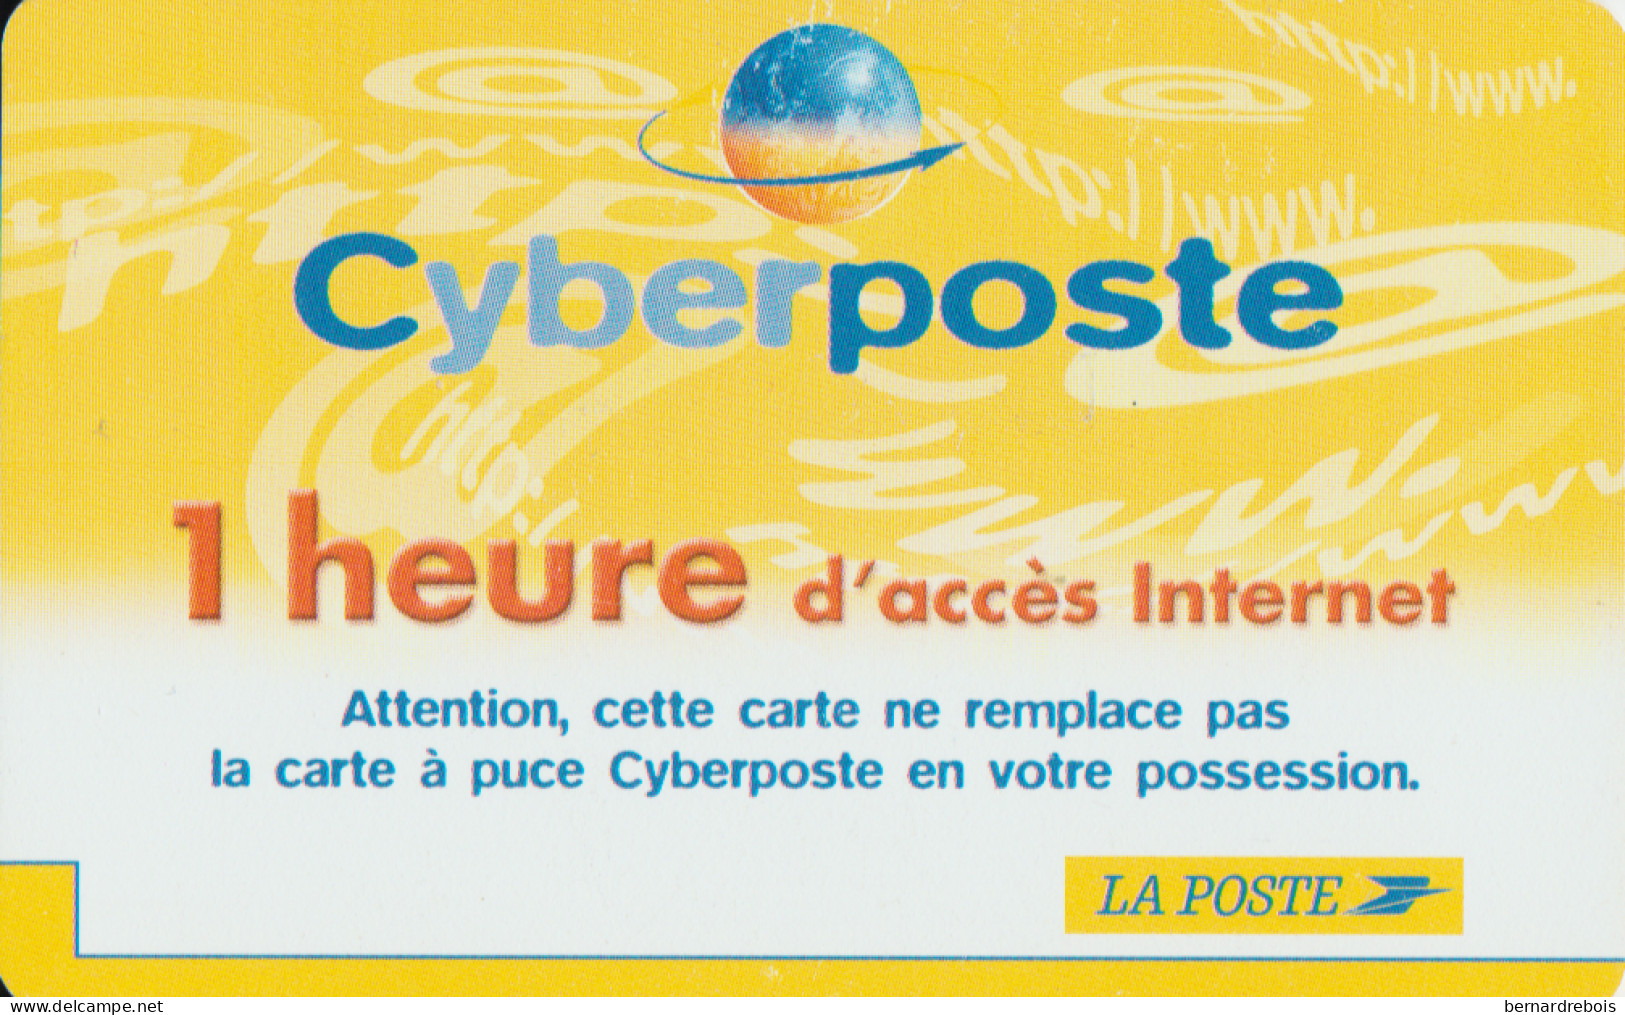 TC22 - TICKET CYBERPOSTE, 1 HEURE, Pour 1 € - FT Tickets